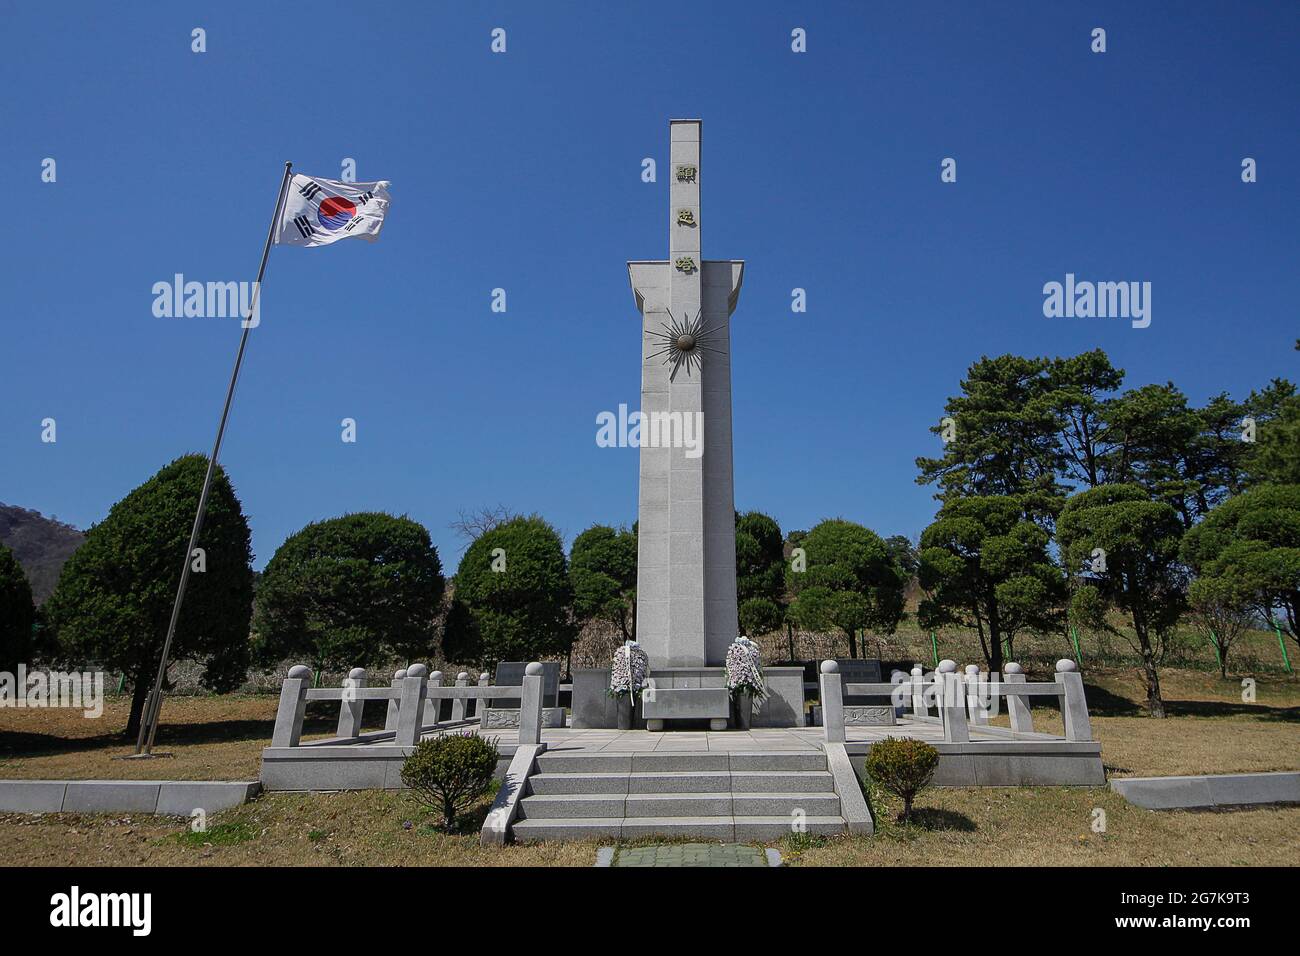 April 11, 2018-Goyang, South Korea-A View of  Korean War veterans memories monument. To Admire the great achievement the 17th Army regiment troops made in the Yeoncheon District battles from December 17, 1950 to March 15, 1951. And to honor the nation's freedom and peace. Stock Photo